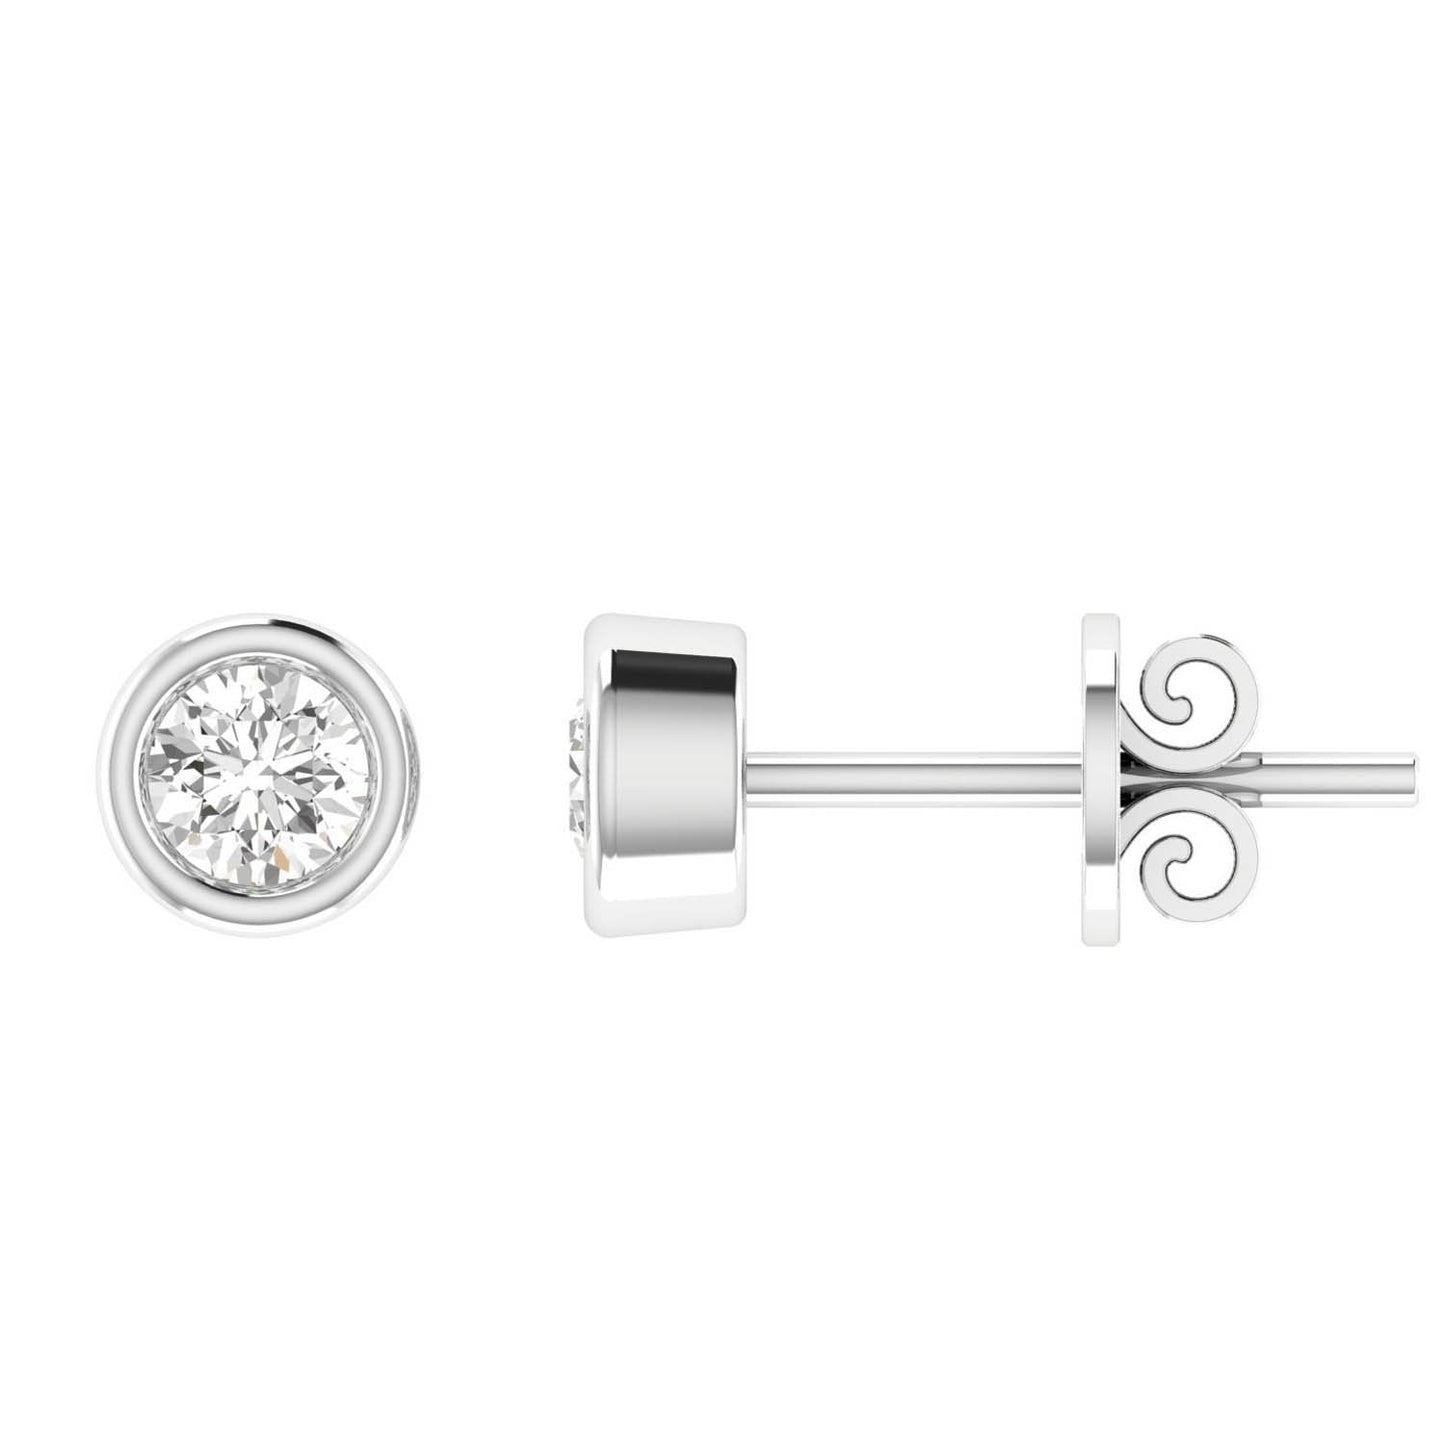 Diamond Stud Earrings with 0.15ct Diamonds in 9K White Gold - 9WBE15